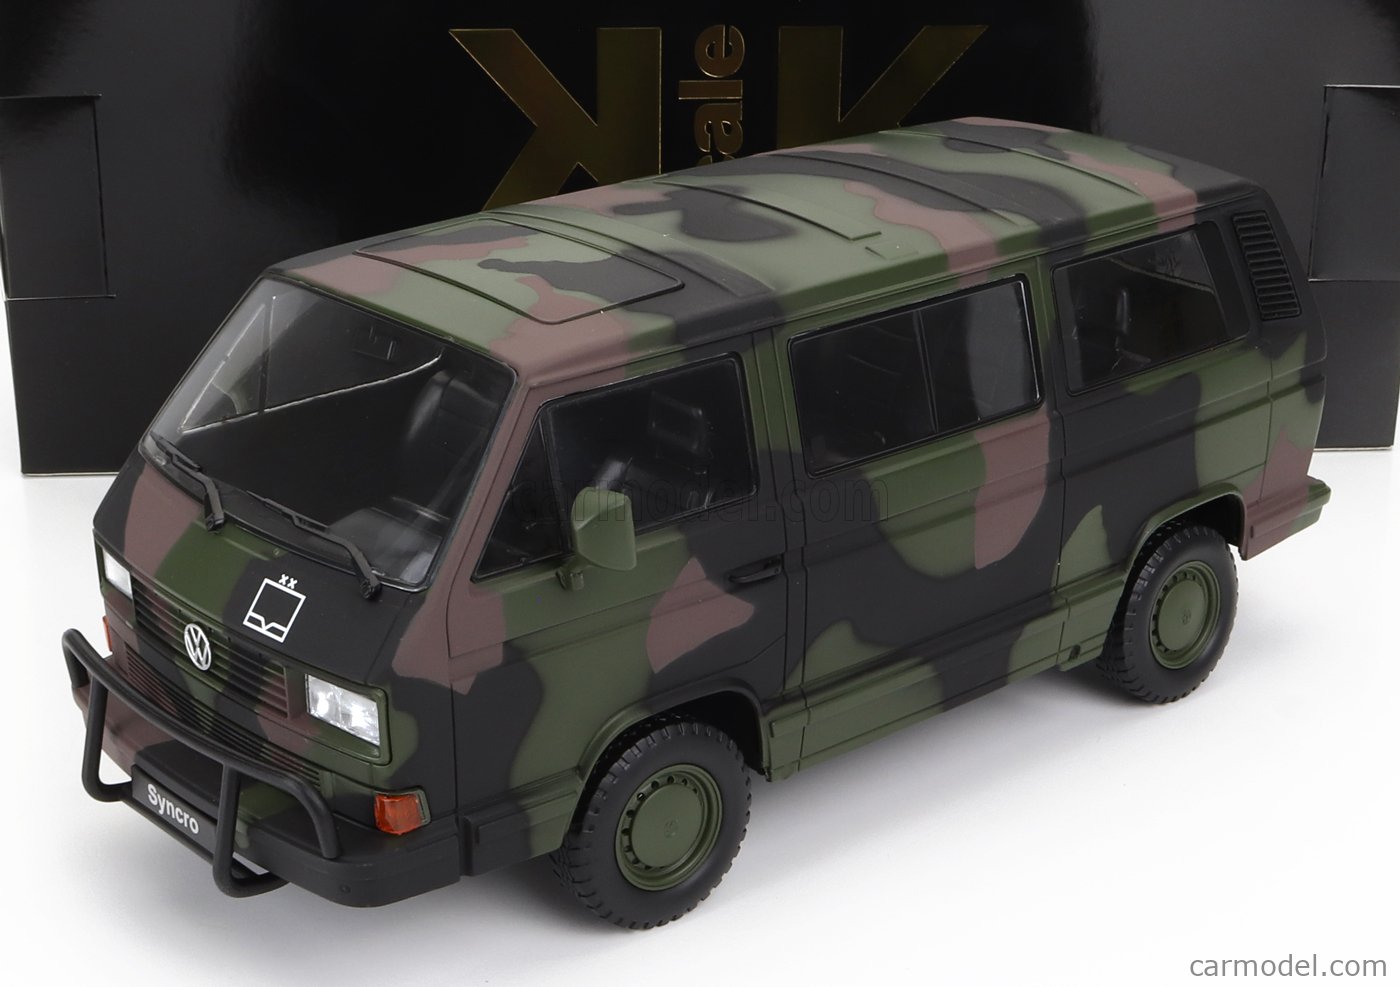 VW BUS T3 - Complete transformation from military vehicle to world